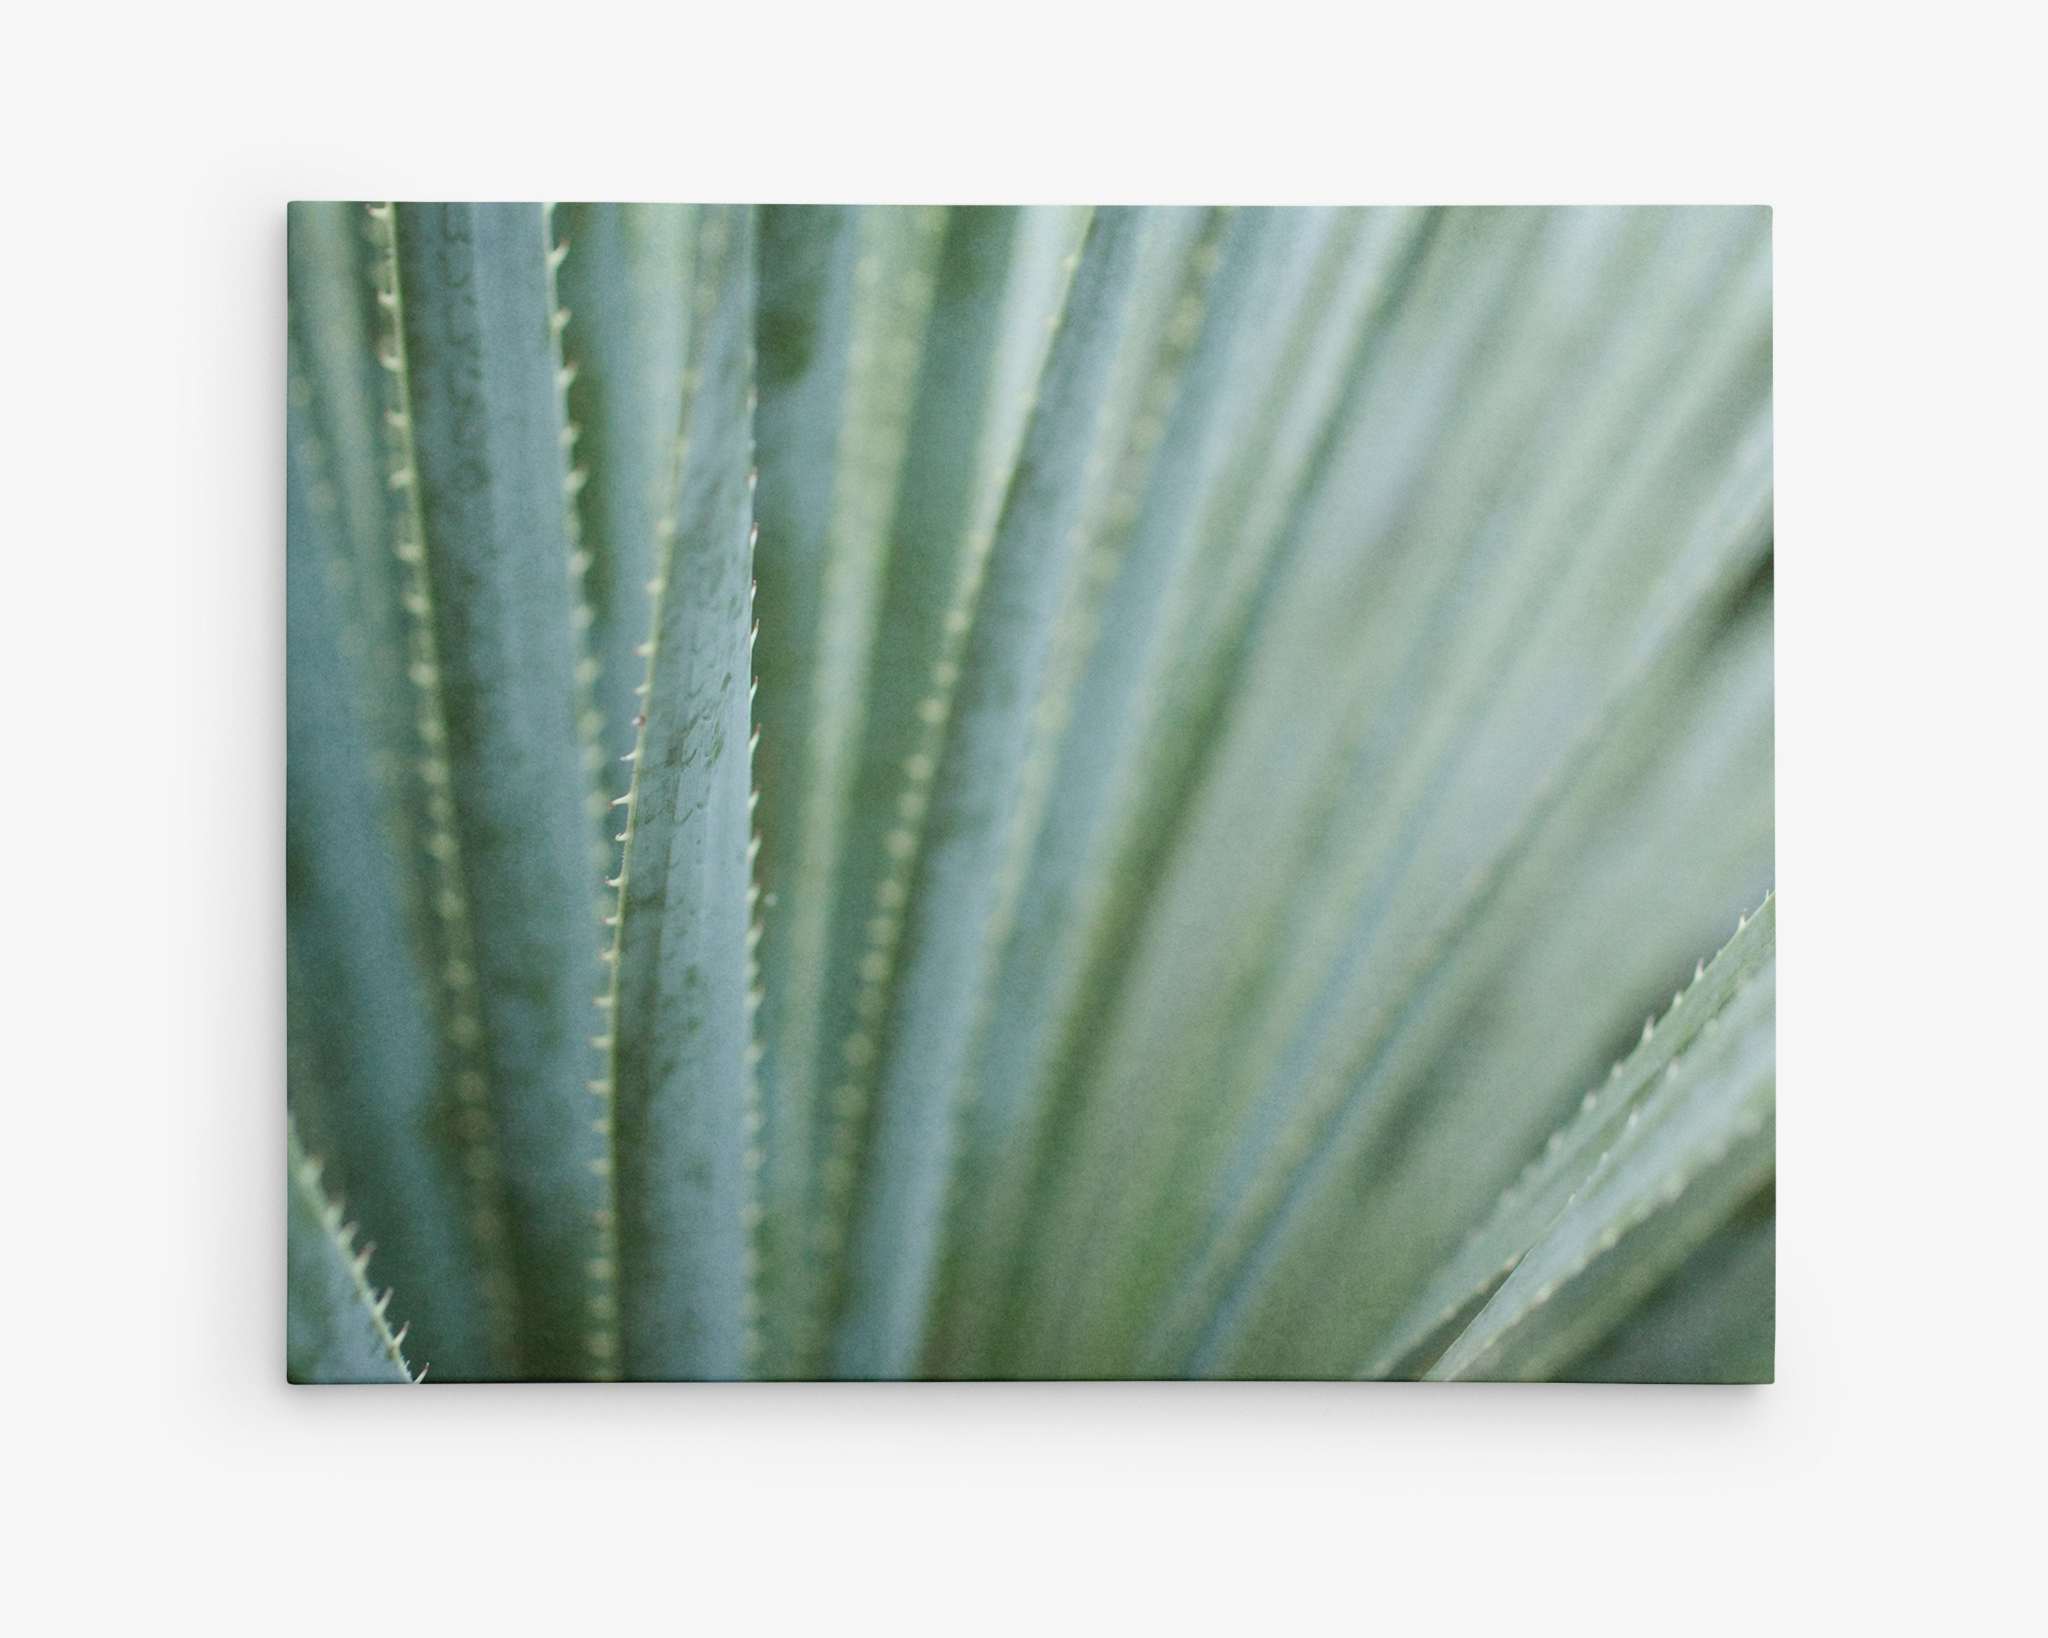 A close-up image of succulent plant leaves. The leaves are pointed and arranged in a radial pattern, with a light green color and subtle texture visible. Like desert plants, their resilience shines through. The background gradually blurs, emphasizing the sharpness of the leaves in the foreground. This is captured beautifully in Offley Green's Abstract Green Botanical Canvas Wall Art, 'Strands and Spikes'.